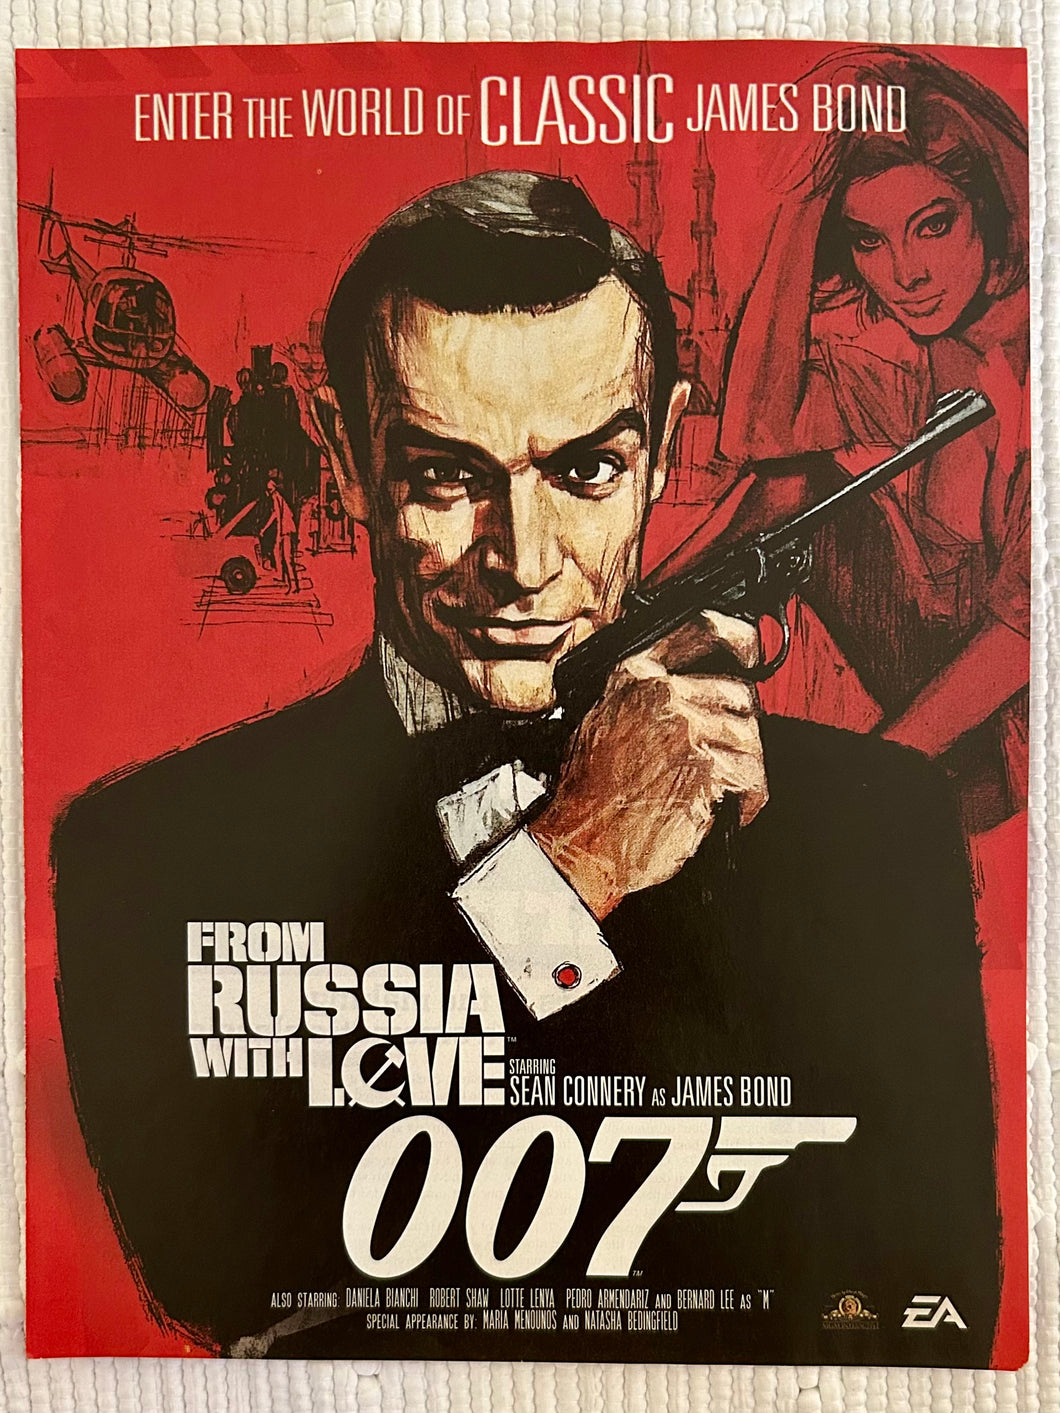 James Bond 007: From Russia With Love - PS2 Xbox NGC - Original Vintage Advertisement - Print Ads - Laminated A4 Poster